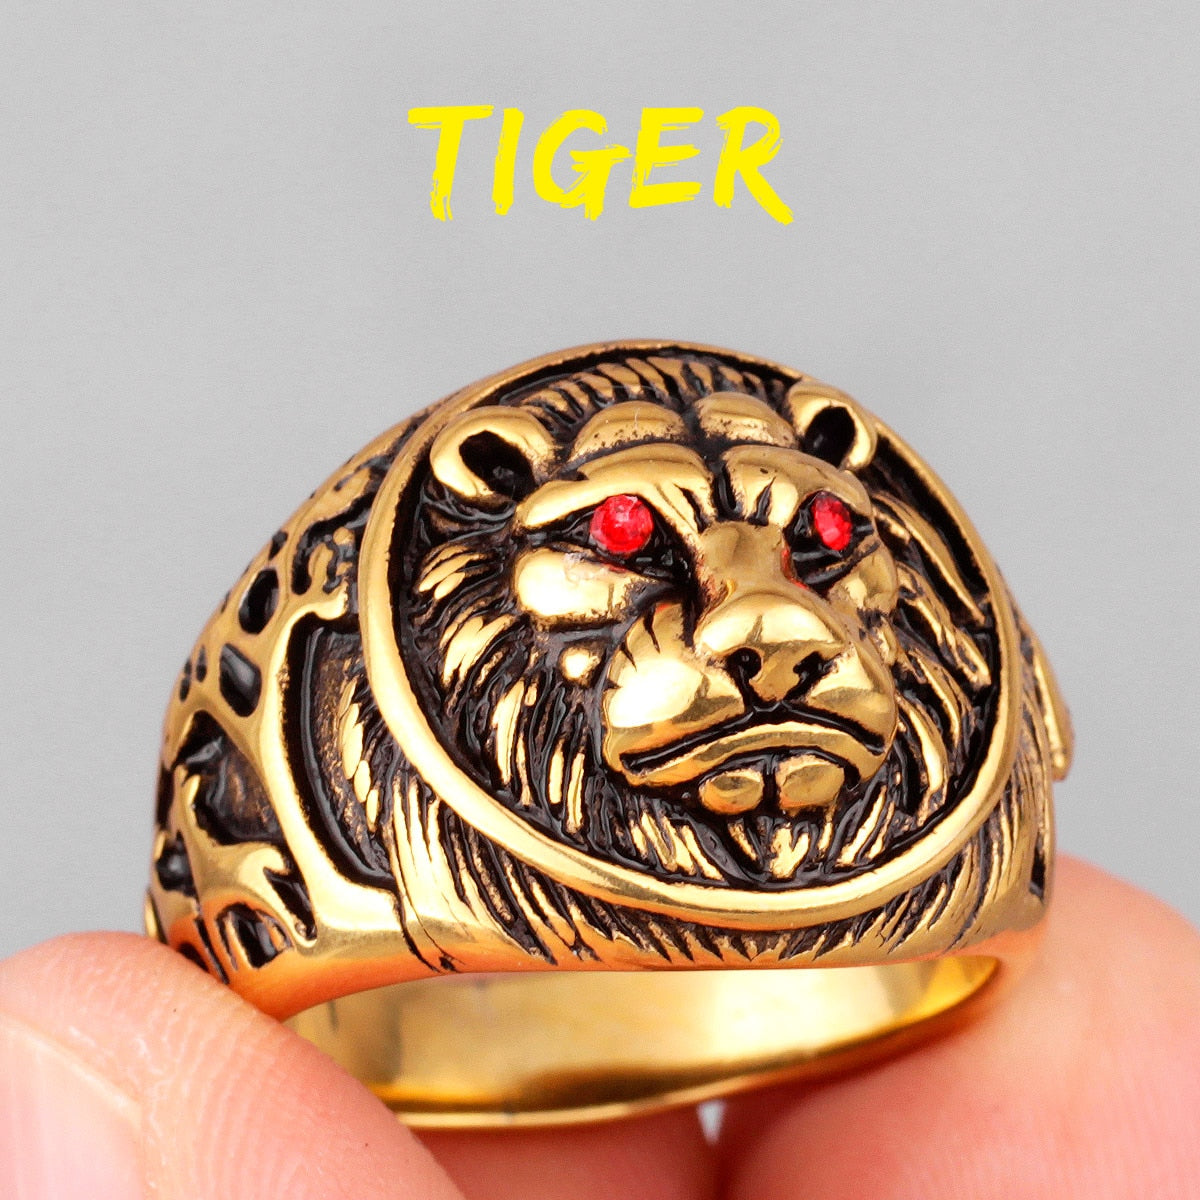 Black Tiger Animal Stainless Steel Mens Rings Punk HipHop Rap Unique For Male Boyfriend Biker Jewelry Creativity Gift R591-Gold